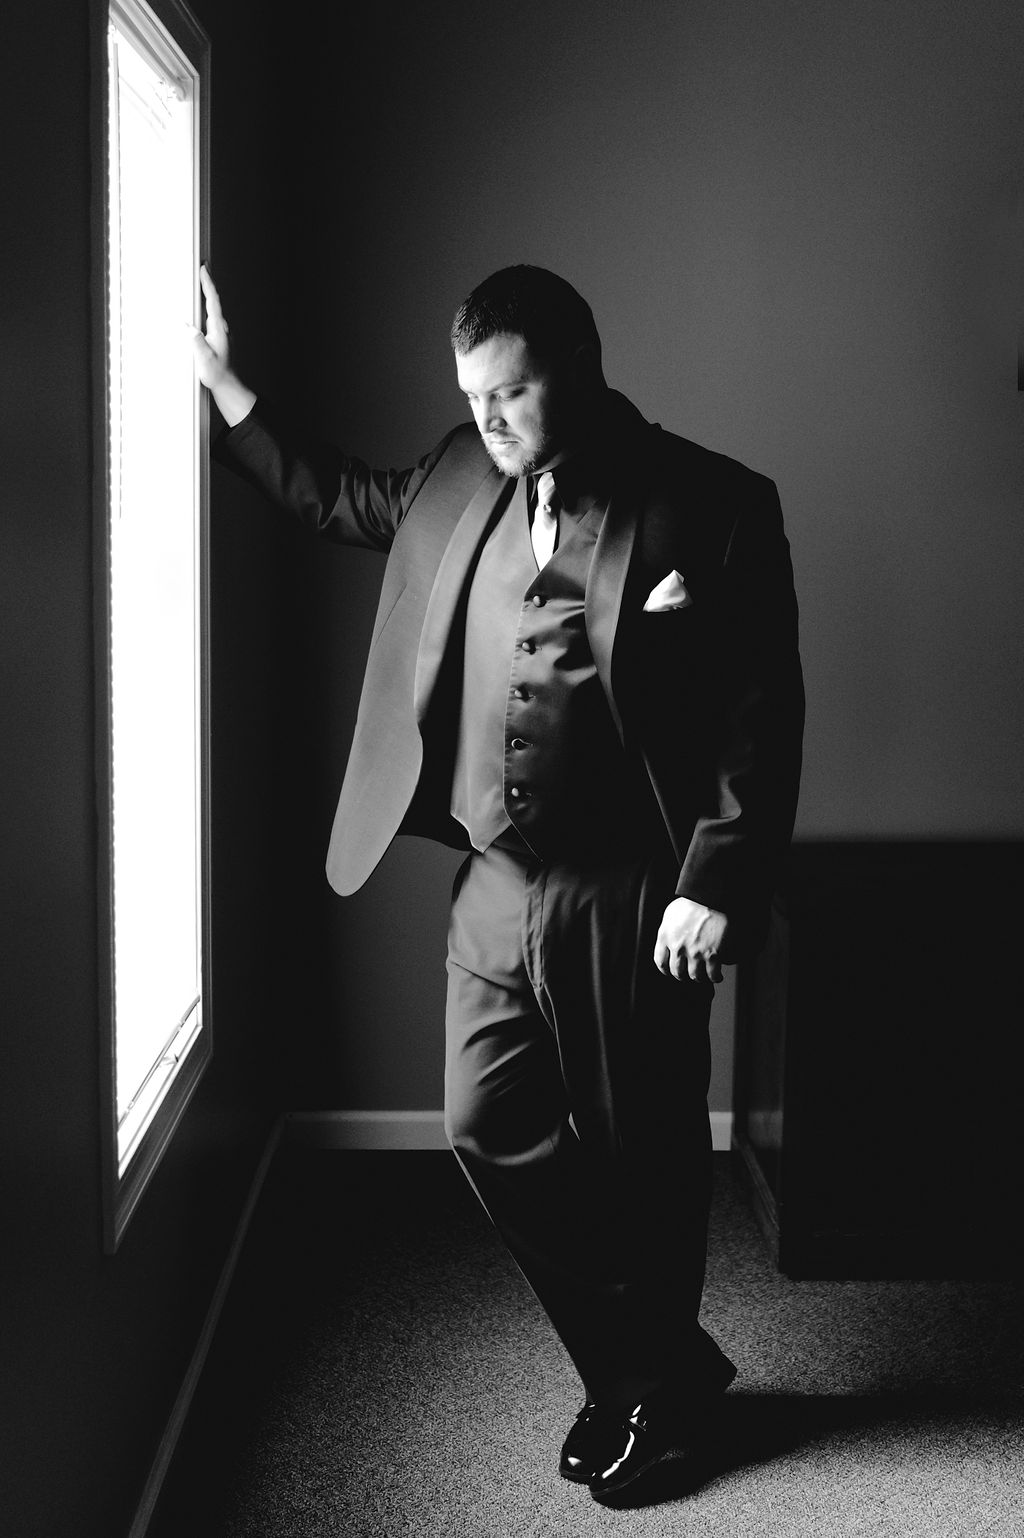 Groom poses next to window looking away from the camera